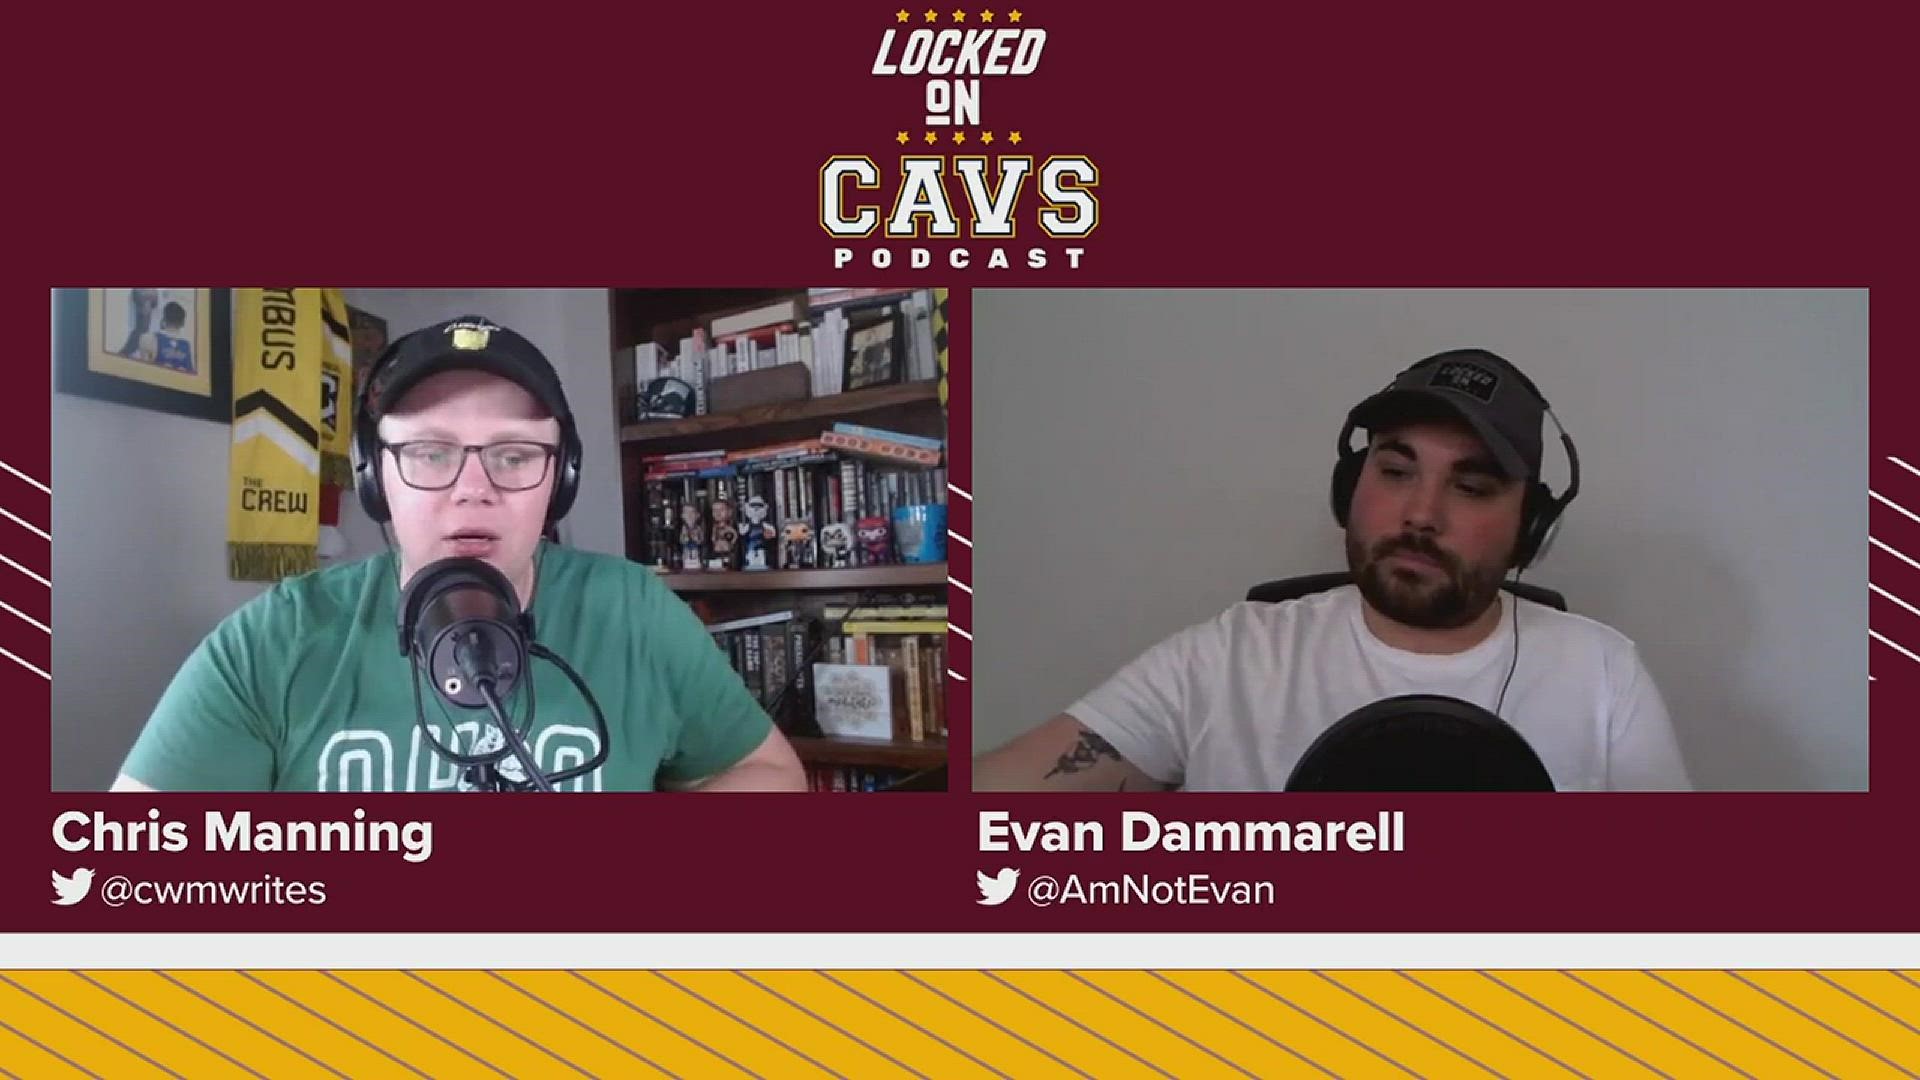 Hosts Chris Manning and Evan Dammarell talk about Lauri Markkanen’s 2021-22 season by considering the good, the bad and how he fit within the team.